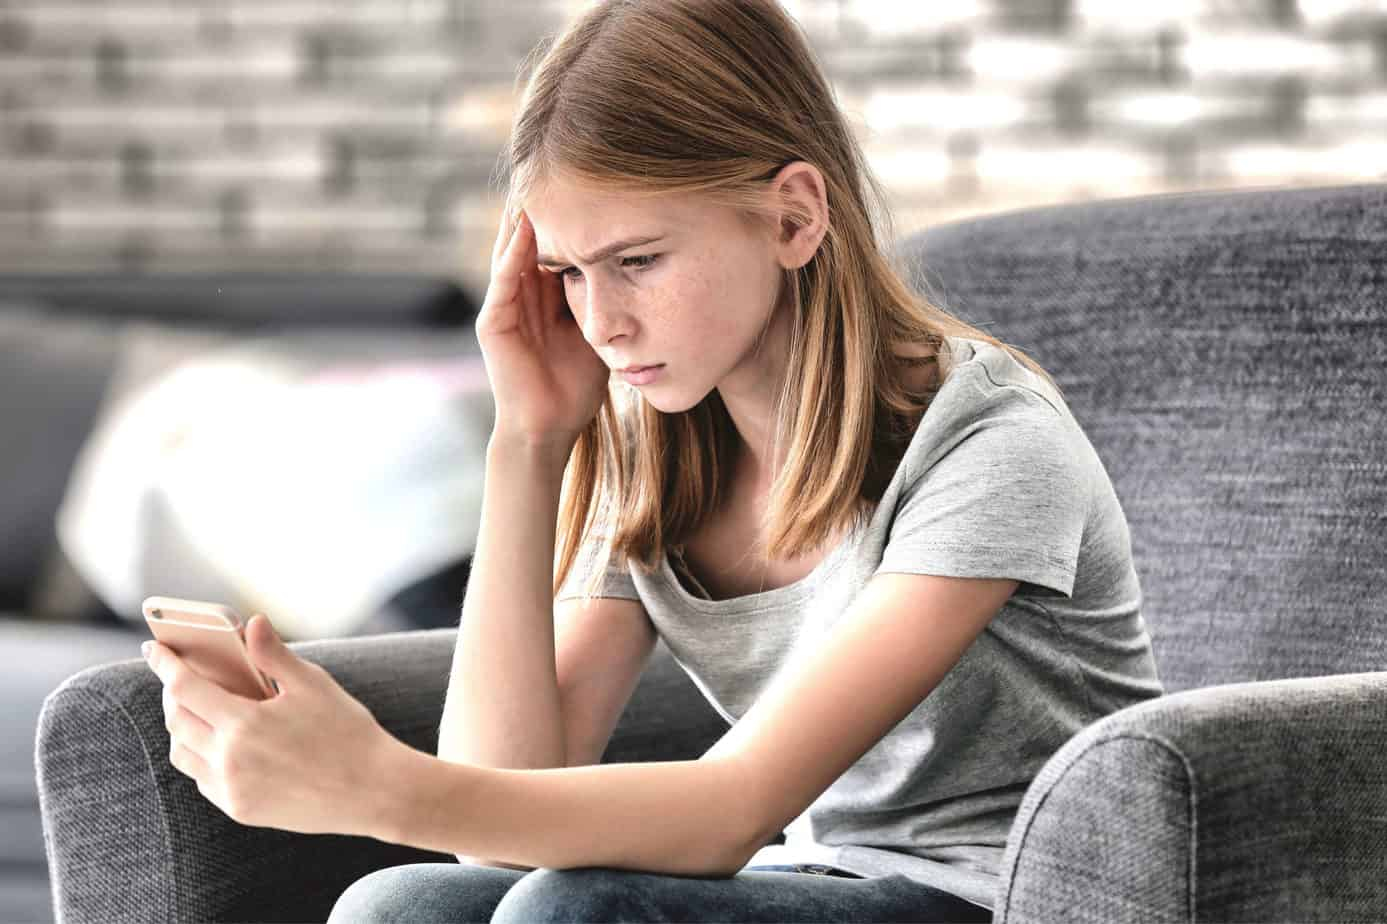 Nice Teen On Couch - The Truth About Sexting: What Parents Should Know || Canopy